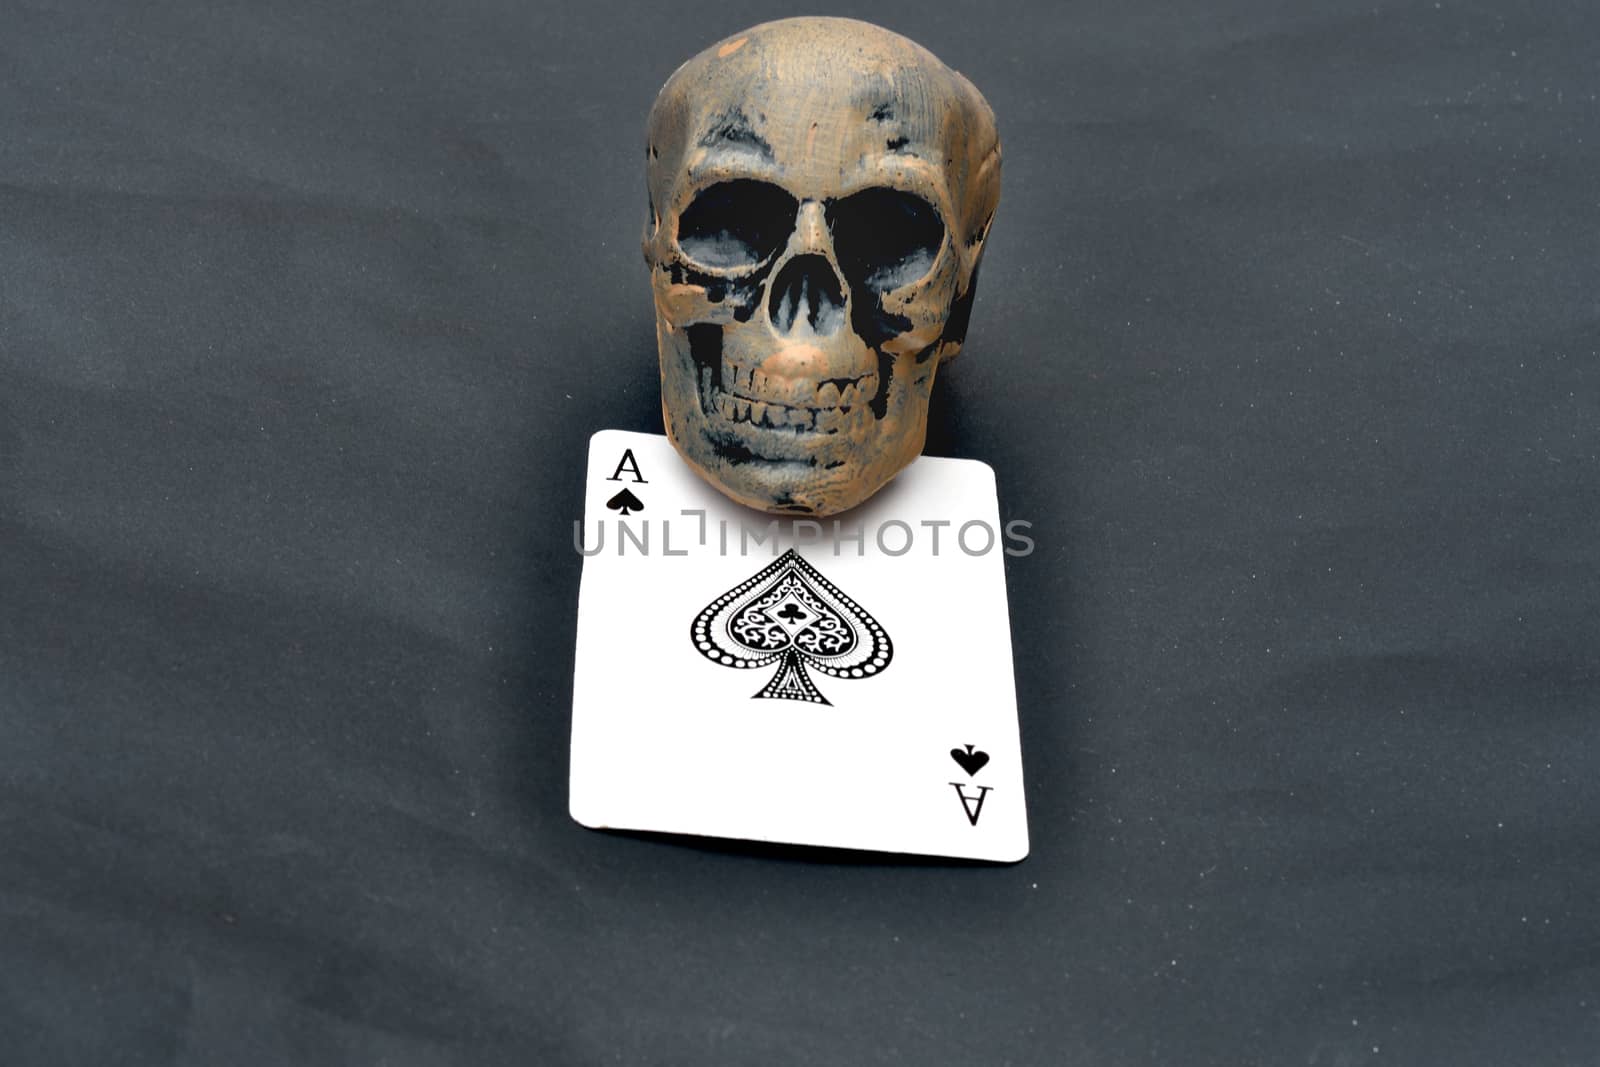 Ace of spades and skull by pauws99